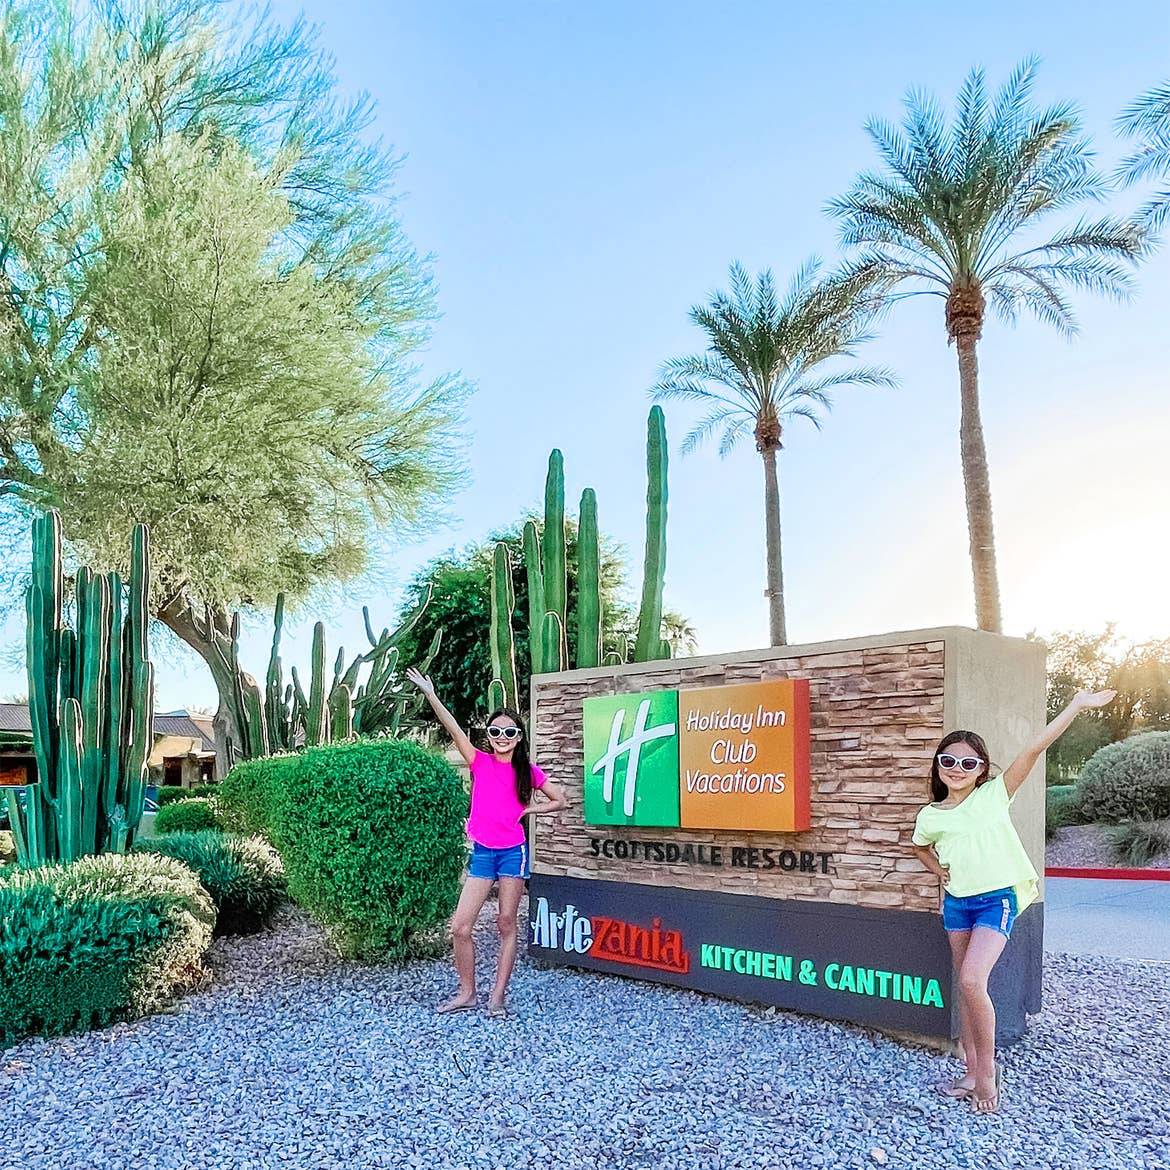 Two young girls in a pink (left) and yellow (right) t-shirt with denim shorts and sandals stand near a decorative main gate sign that reads 'Holiday Inn Club Vacations Scottsdale Resort.'